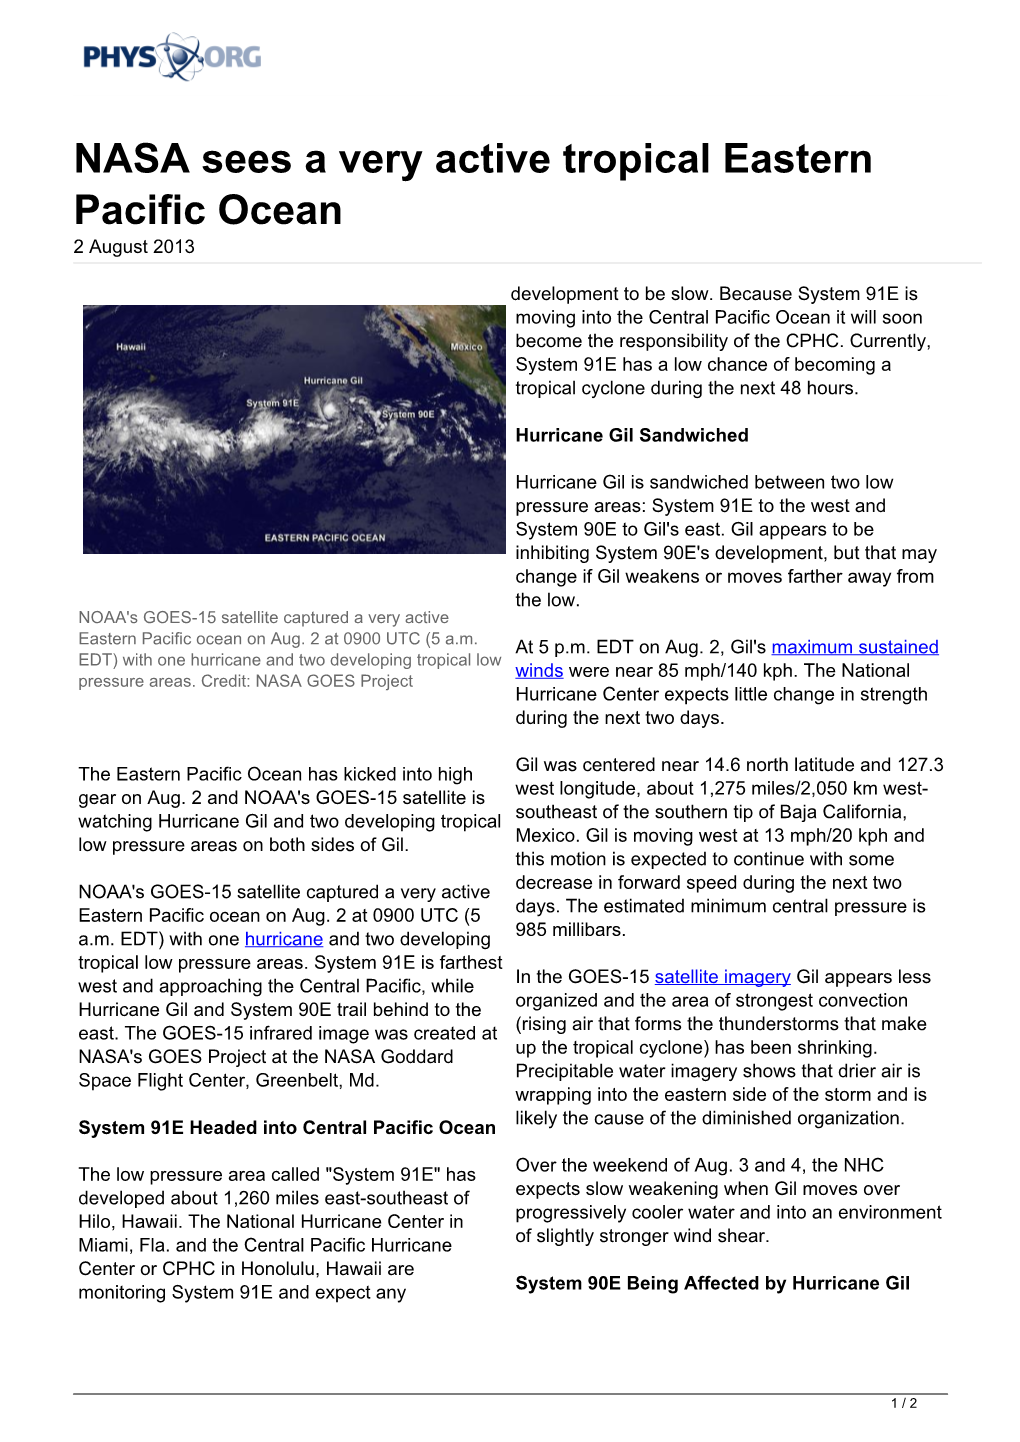 NASA Sees a Very Active Tropical Eastern Pacific Ocean 2 August 2013